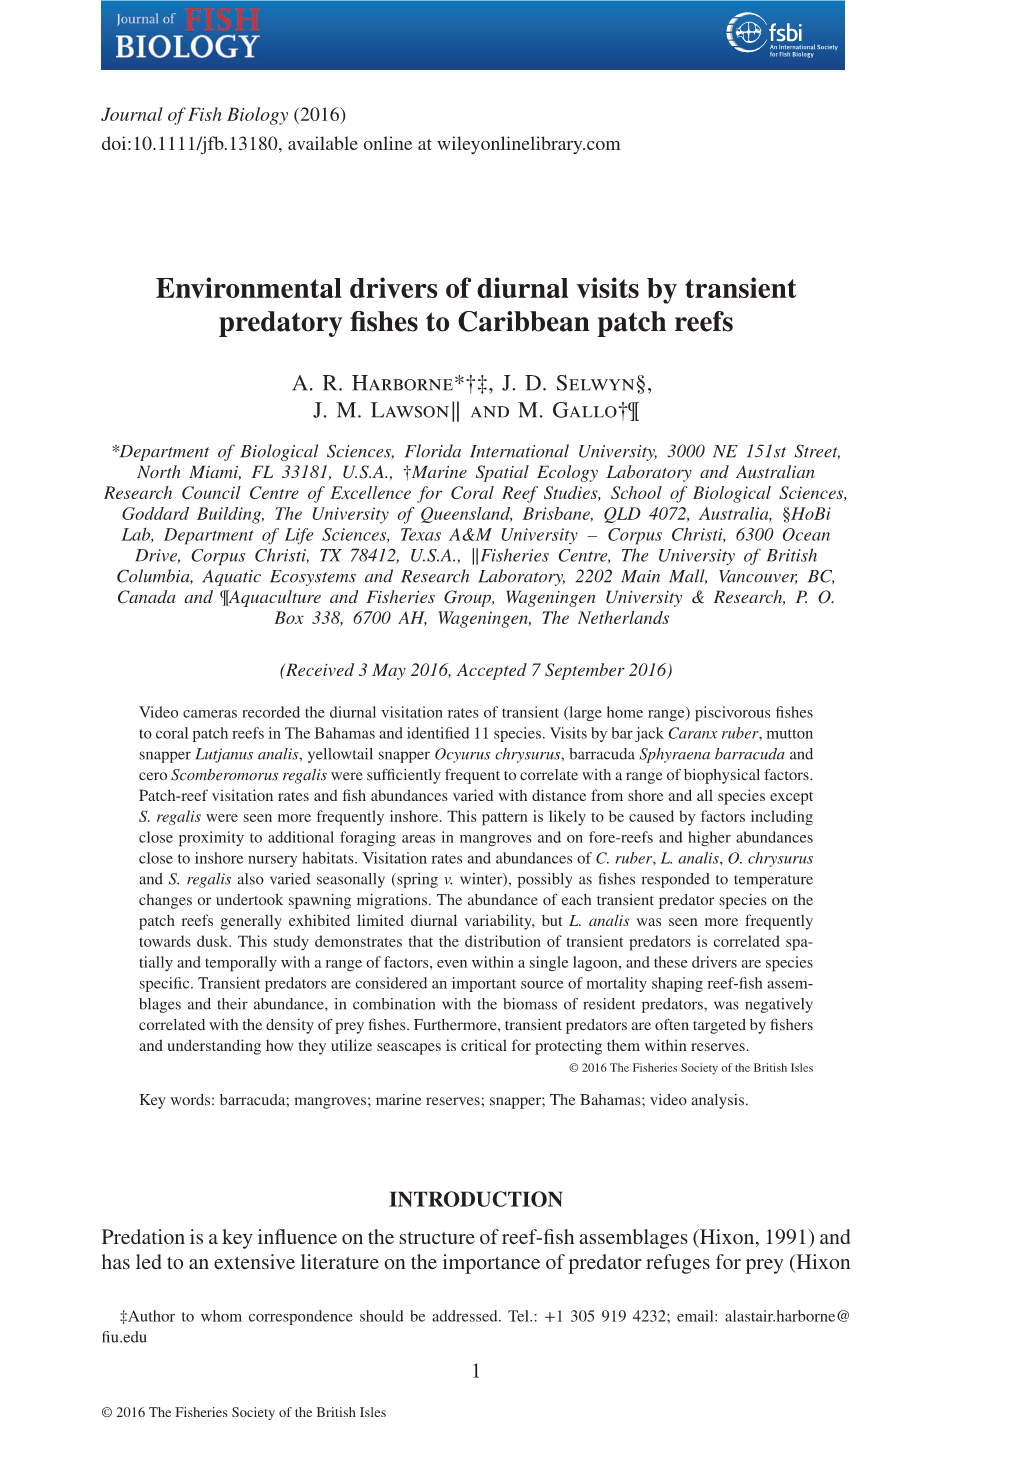 Environmental Drivers of Diurnal Visits by Transient Predatory Fishes to Caribbean Patch Reefs